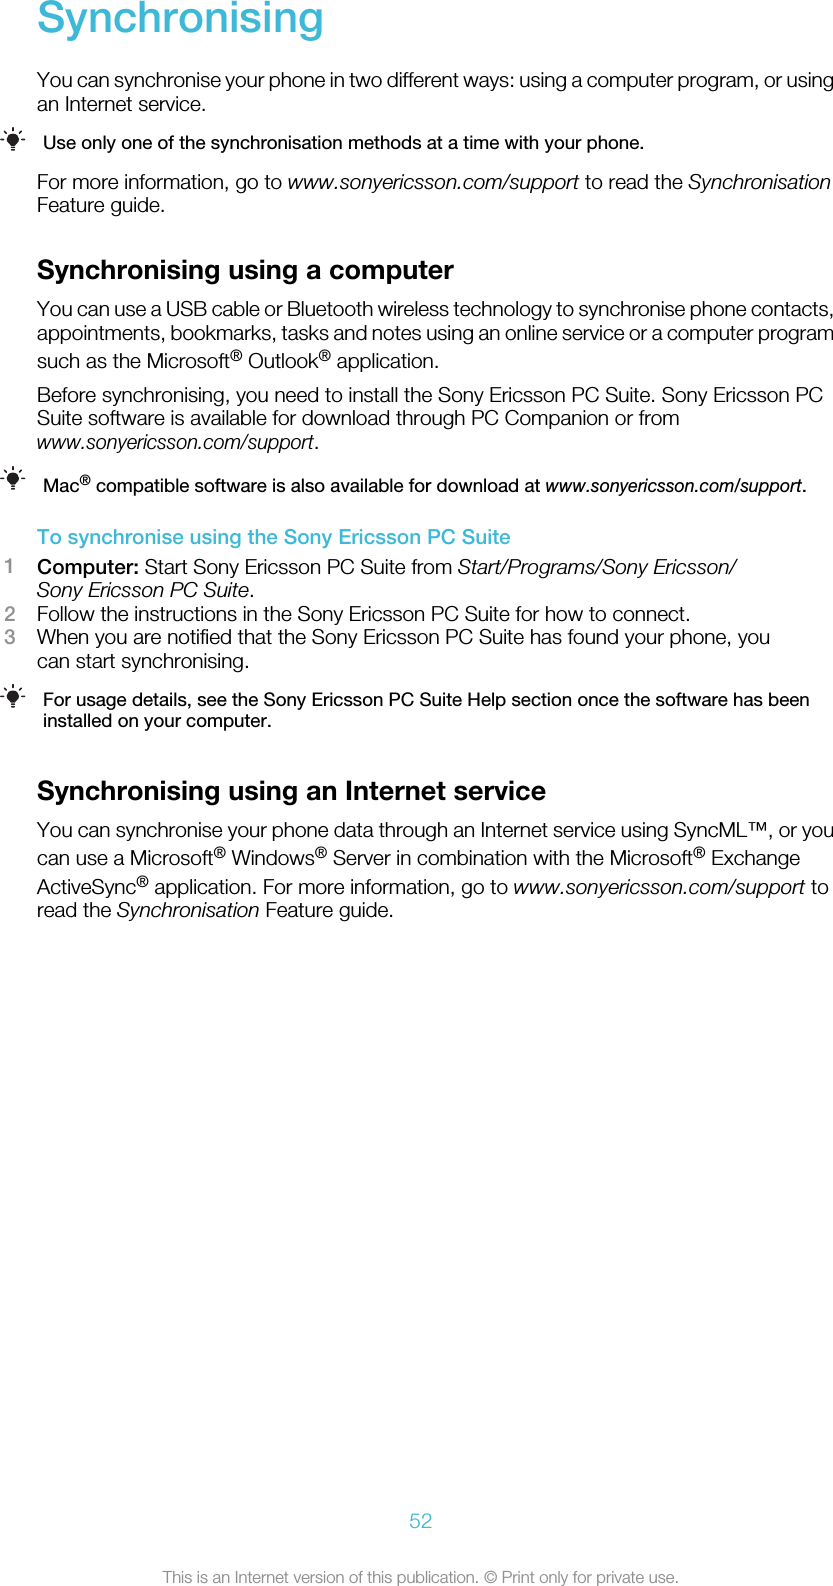 SynchronisingYou can synchronise your phone in two different ways: using a computer program, or usingan Internet service.Use only one of the synchronisation methods at a time with your phone.For more information, go to www.sonyericsson.com/support to read the SynchronisationFeature guide.Synchronising using a computerYou can use a USB cable or Bluetooth wireless technology to synchronise phone contacts,appointments, bookmarks, tasks and notes using an online service or a computer programsuch as the Microsoft® Outlook® application.Before synchronising, you need to install the Sony Ericsson PC Suite. Sony Ericsson PCSuite software is available for download through PC Companion or fromwww.sonyericsson.com/support.Mac® compatible software is also available for download at www.sonyericsson.com/support.To synchronise using the Sony Ericsson PC Suite1Computer: Start Sony Ericsson PC Suite from Start/Programs/Sony Ericsson/Sony Ericsson PC Suite.2Follow the instructions in the Sony Ericsson PC Suite for how to connect.3When you are notified that the Sony Ericsson PC Suite has found your phone, youcan start synchronising.For usage details, see the Sony Ericsson PC Suite Help section once the software has beeninstalled on your computer.Synchronising using an Internet serviceYou can synchronise your phone data through an Internet service using SyncML™, or youcan use a Microsoft® Windows® Server in combination with the Microsoft® ExchangeActiveSync® application. For more information, go to www.sonyericsson.com/support toread the Synchronisation Feature guide.52This is an Internet version of this publication. © Print only for private use.